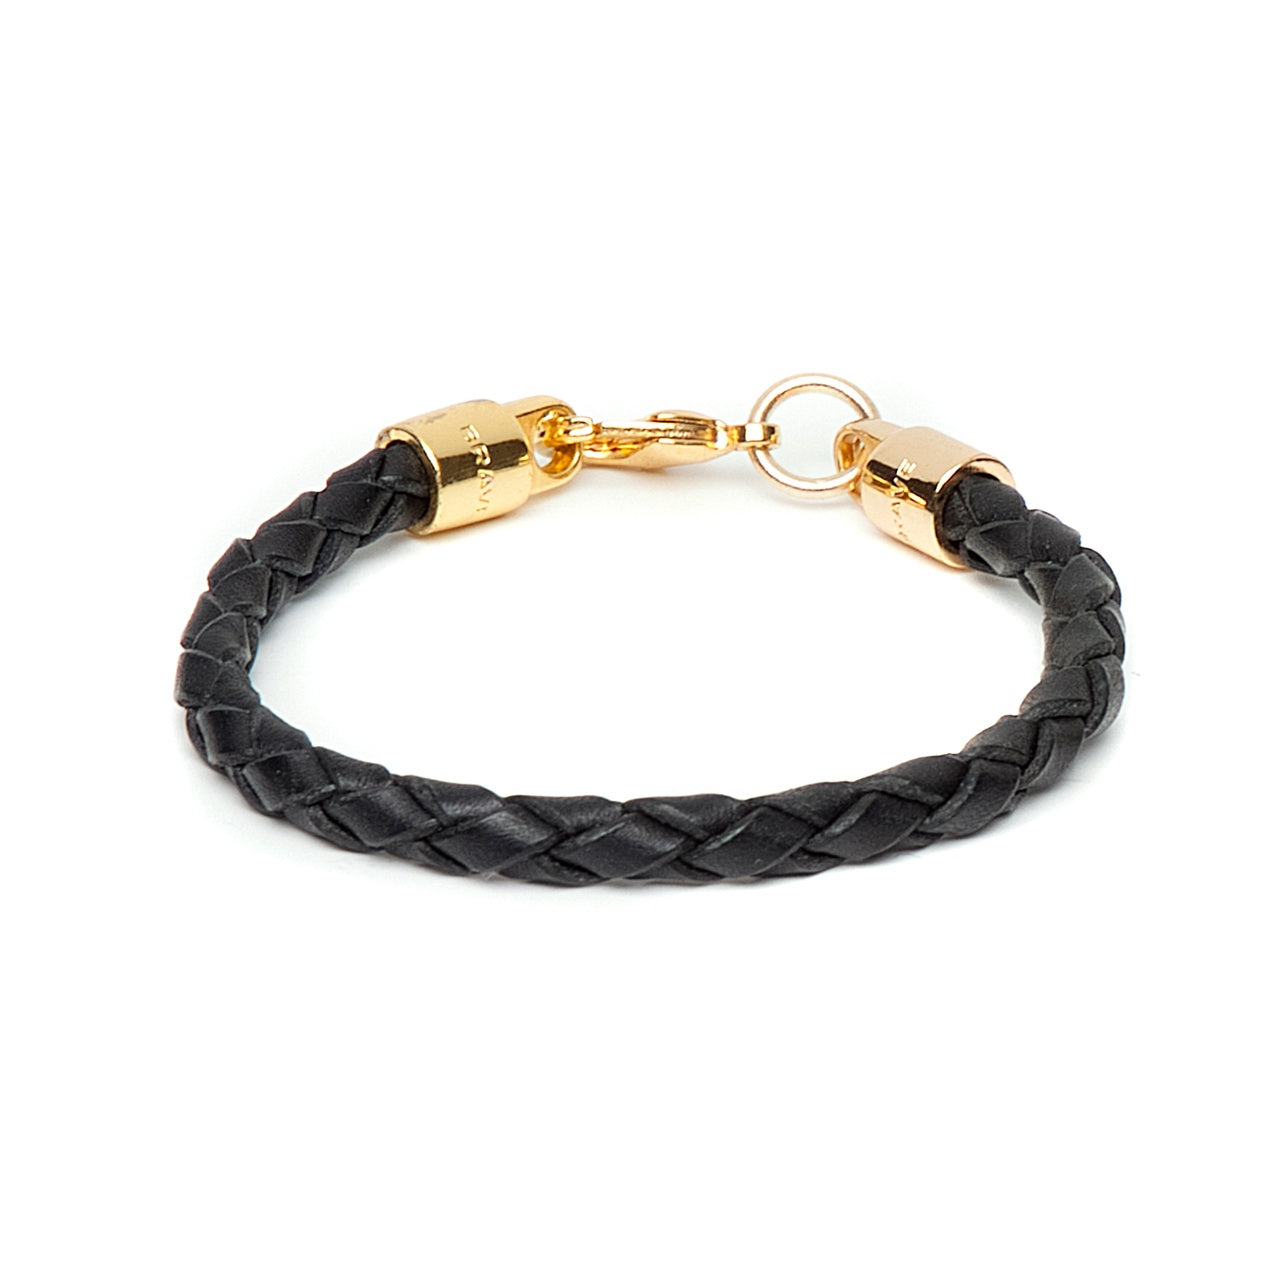 Brave Jair woven leather bracelet in black with gold